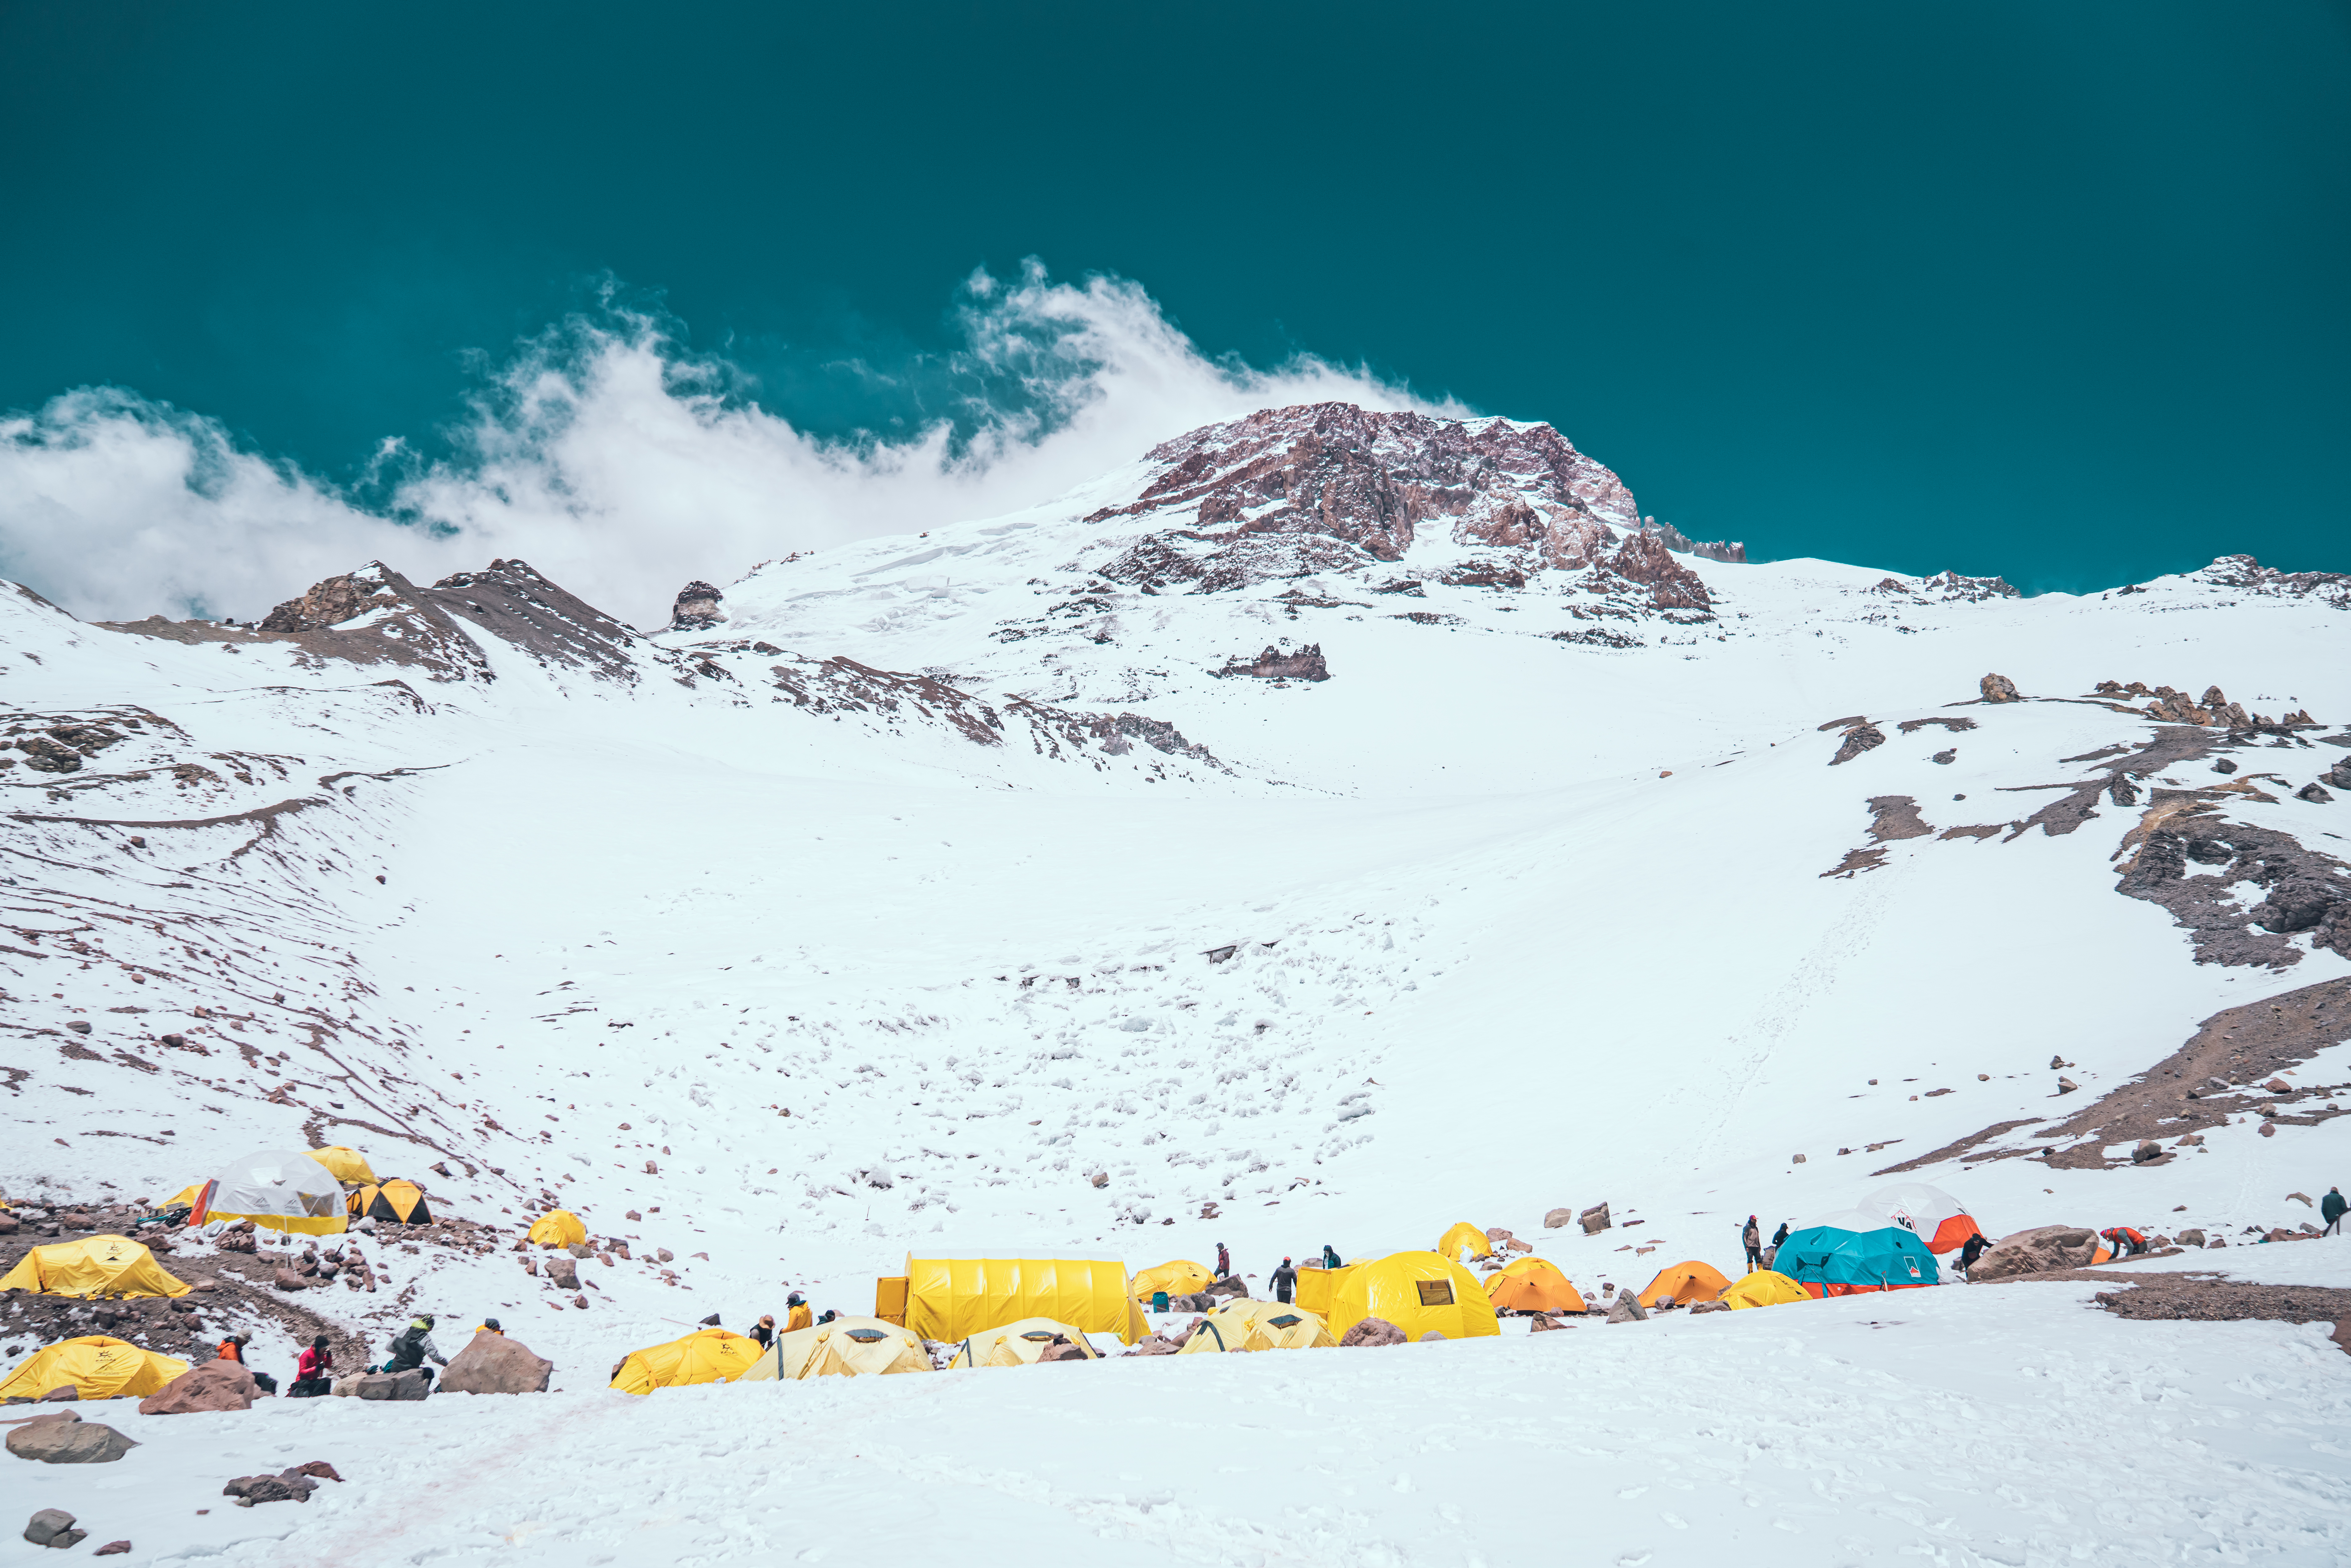 Ascent to Aconcagua: Explore the Three Expeditions at the Summit of the “7 Summits”